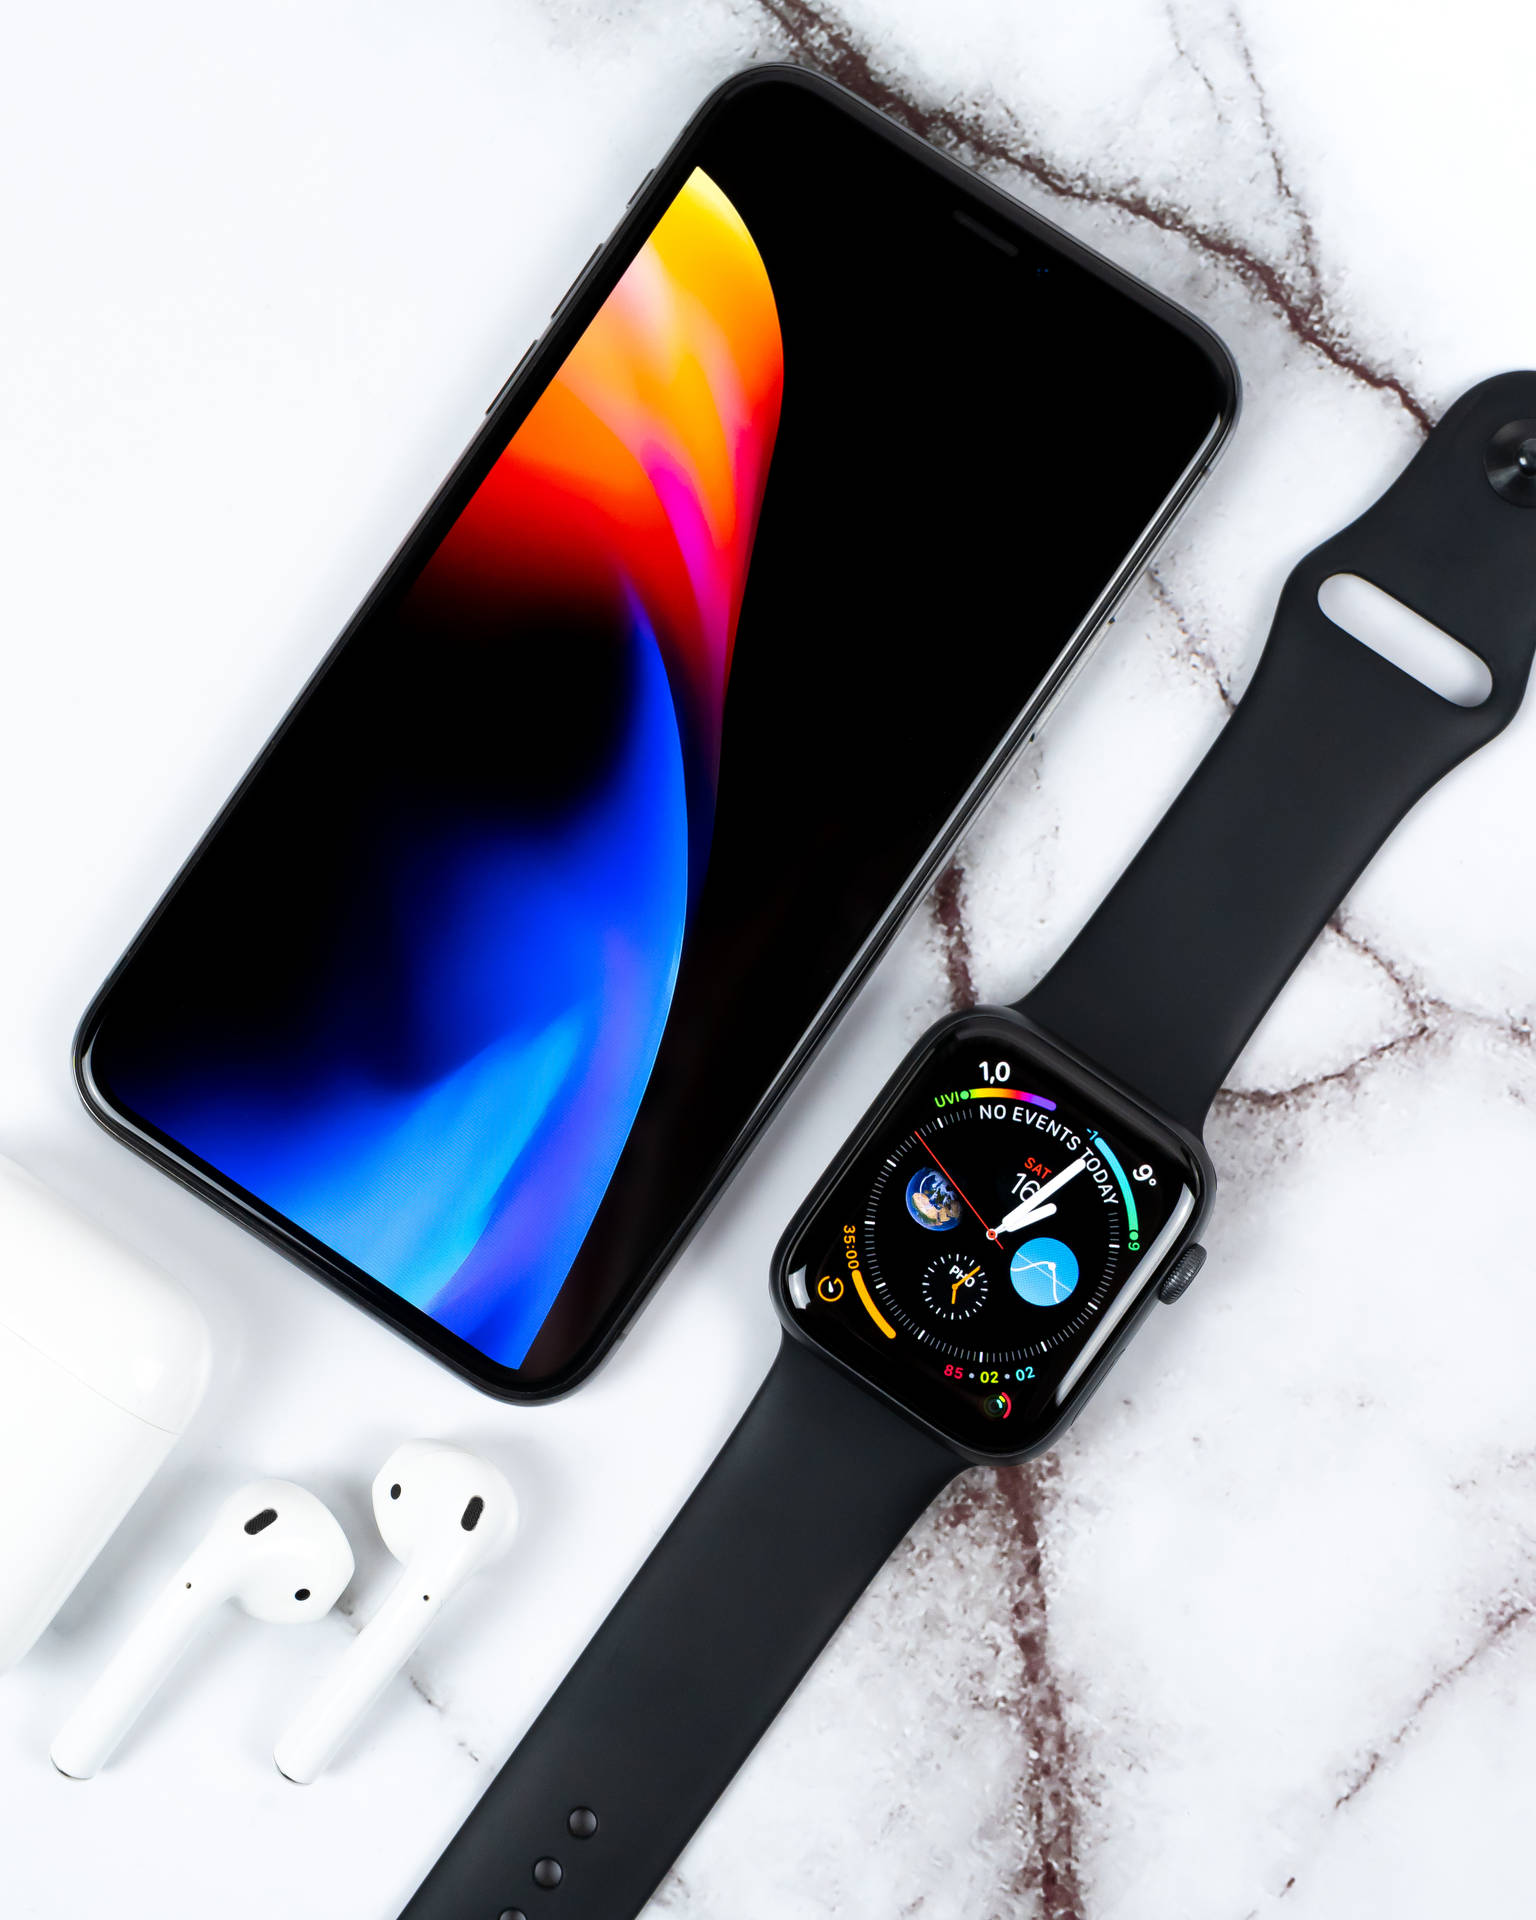 IPhone XS 3831X4789 Wallpaper and Background Image